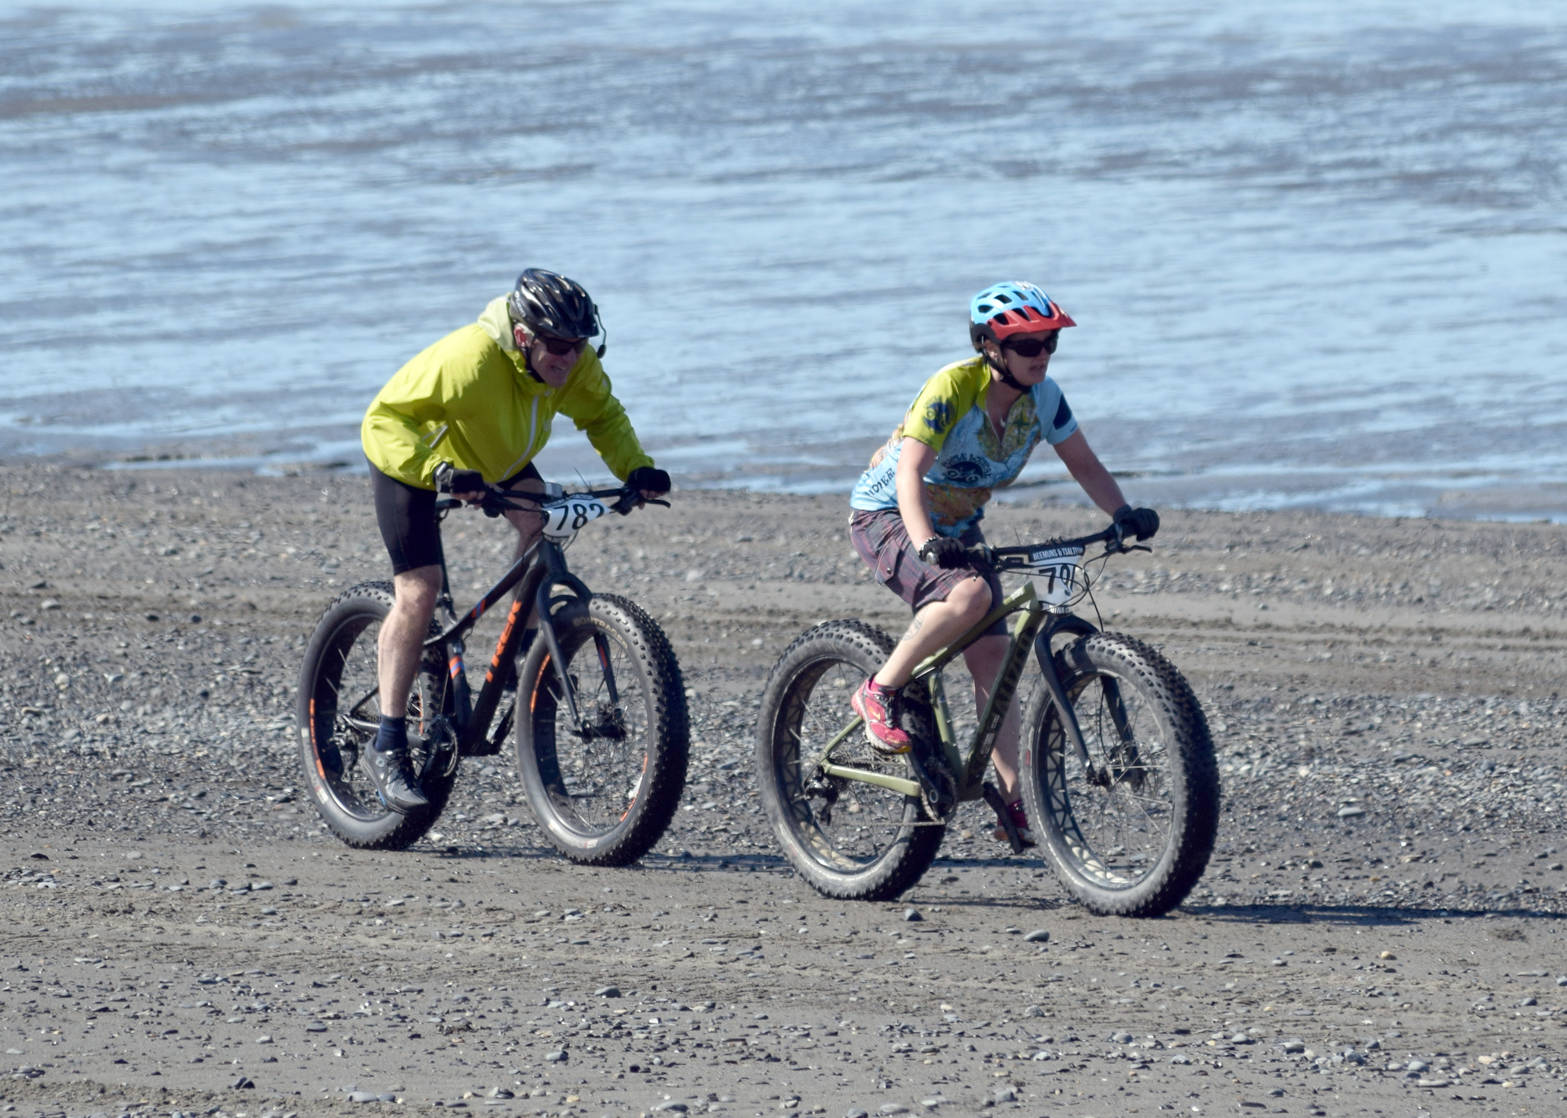 Catriona Reynolds finishes off a victory in the 10-mile bike at the Mouth to Mouth Wild Run and Ride on Monday at the Kenai beach. On Reynolds’ tail is Sky Carver. (Photo by Jeff Helminiak/Peninsula Clarion)